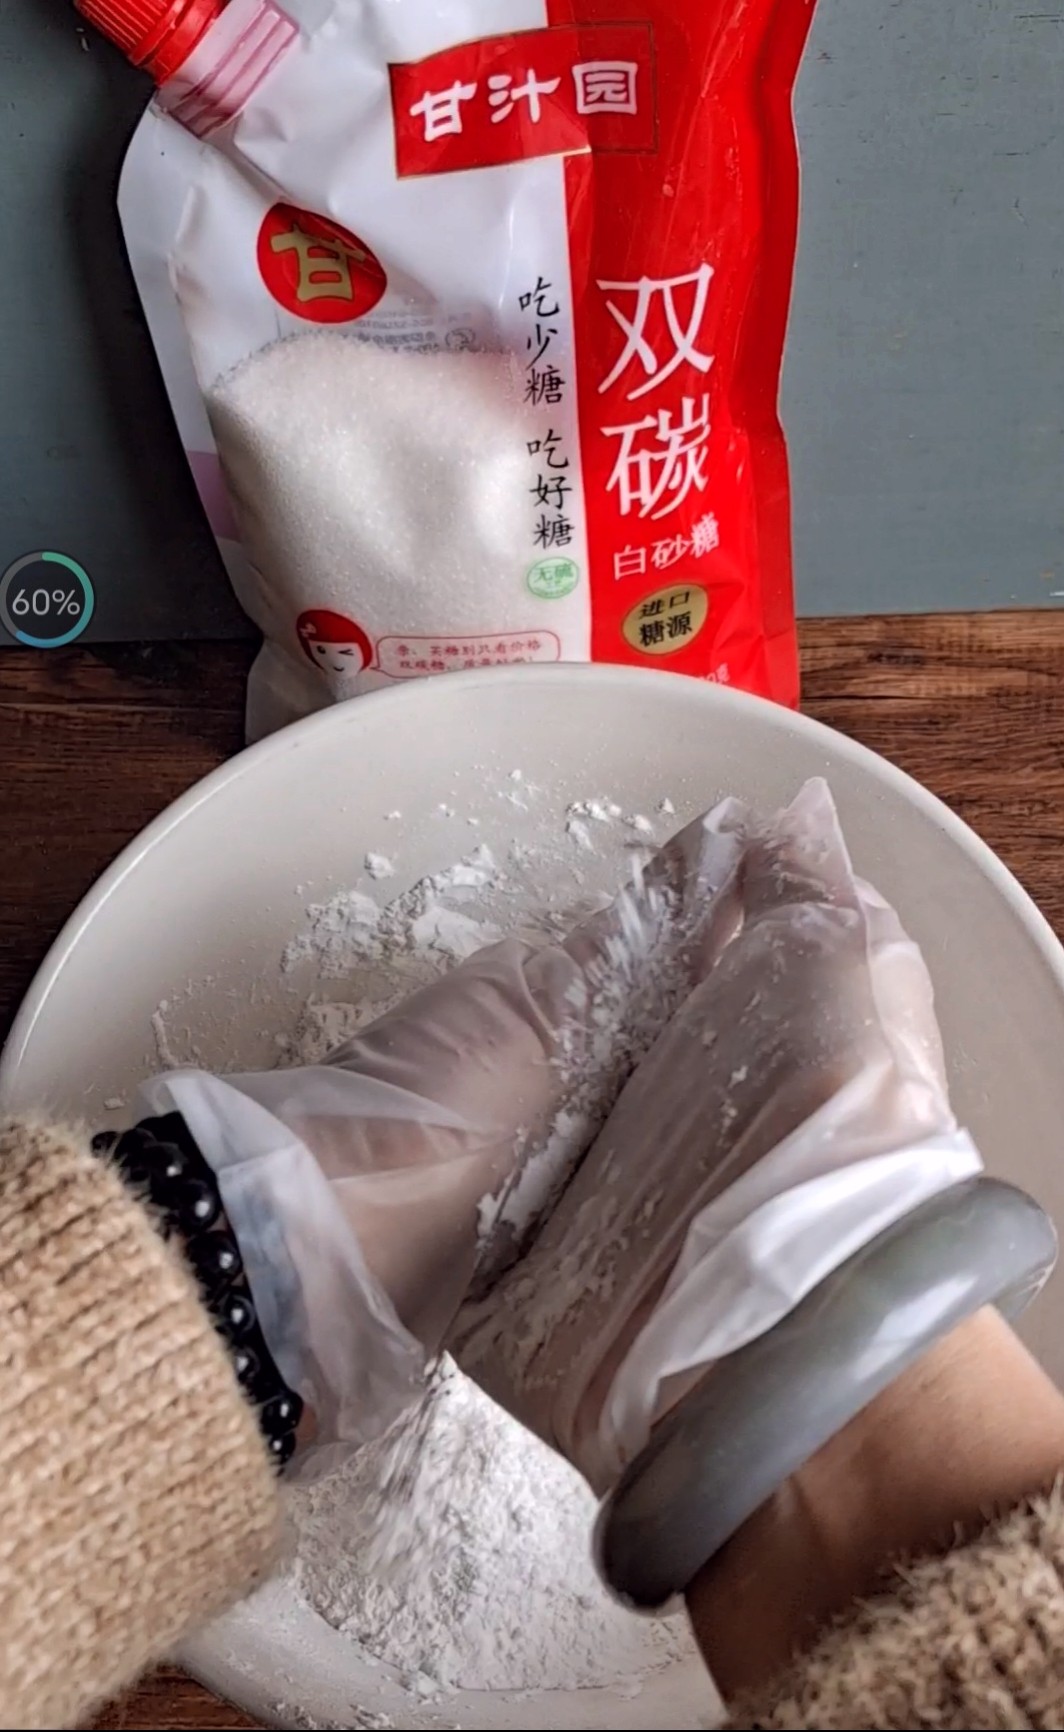 It’s Easy to Make Chinese Pastries from Childhood...steamed Sugar Cakes recipe